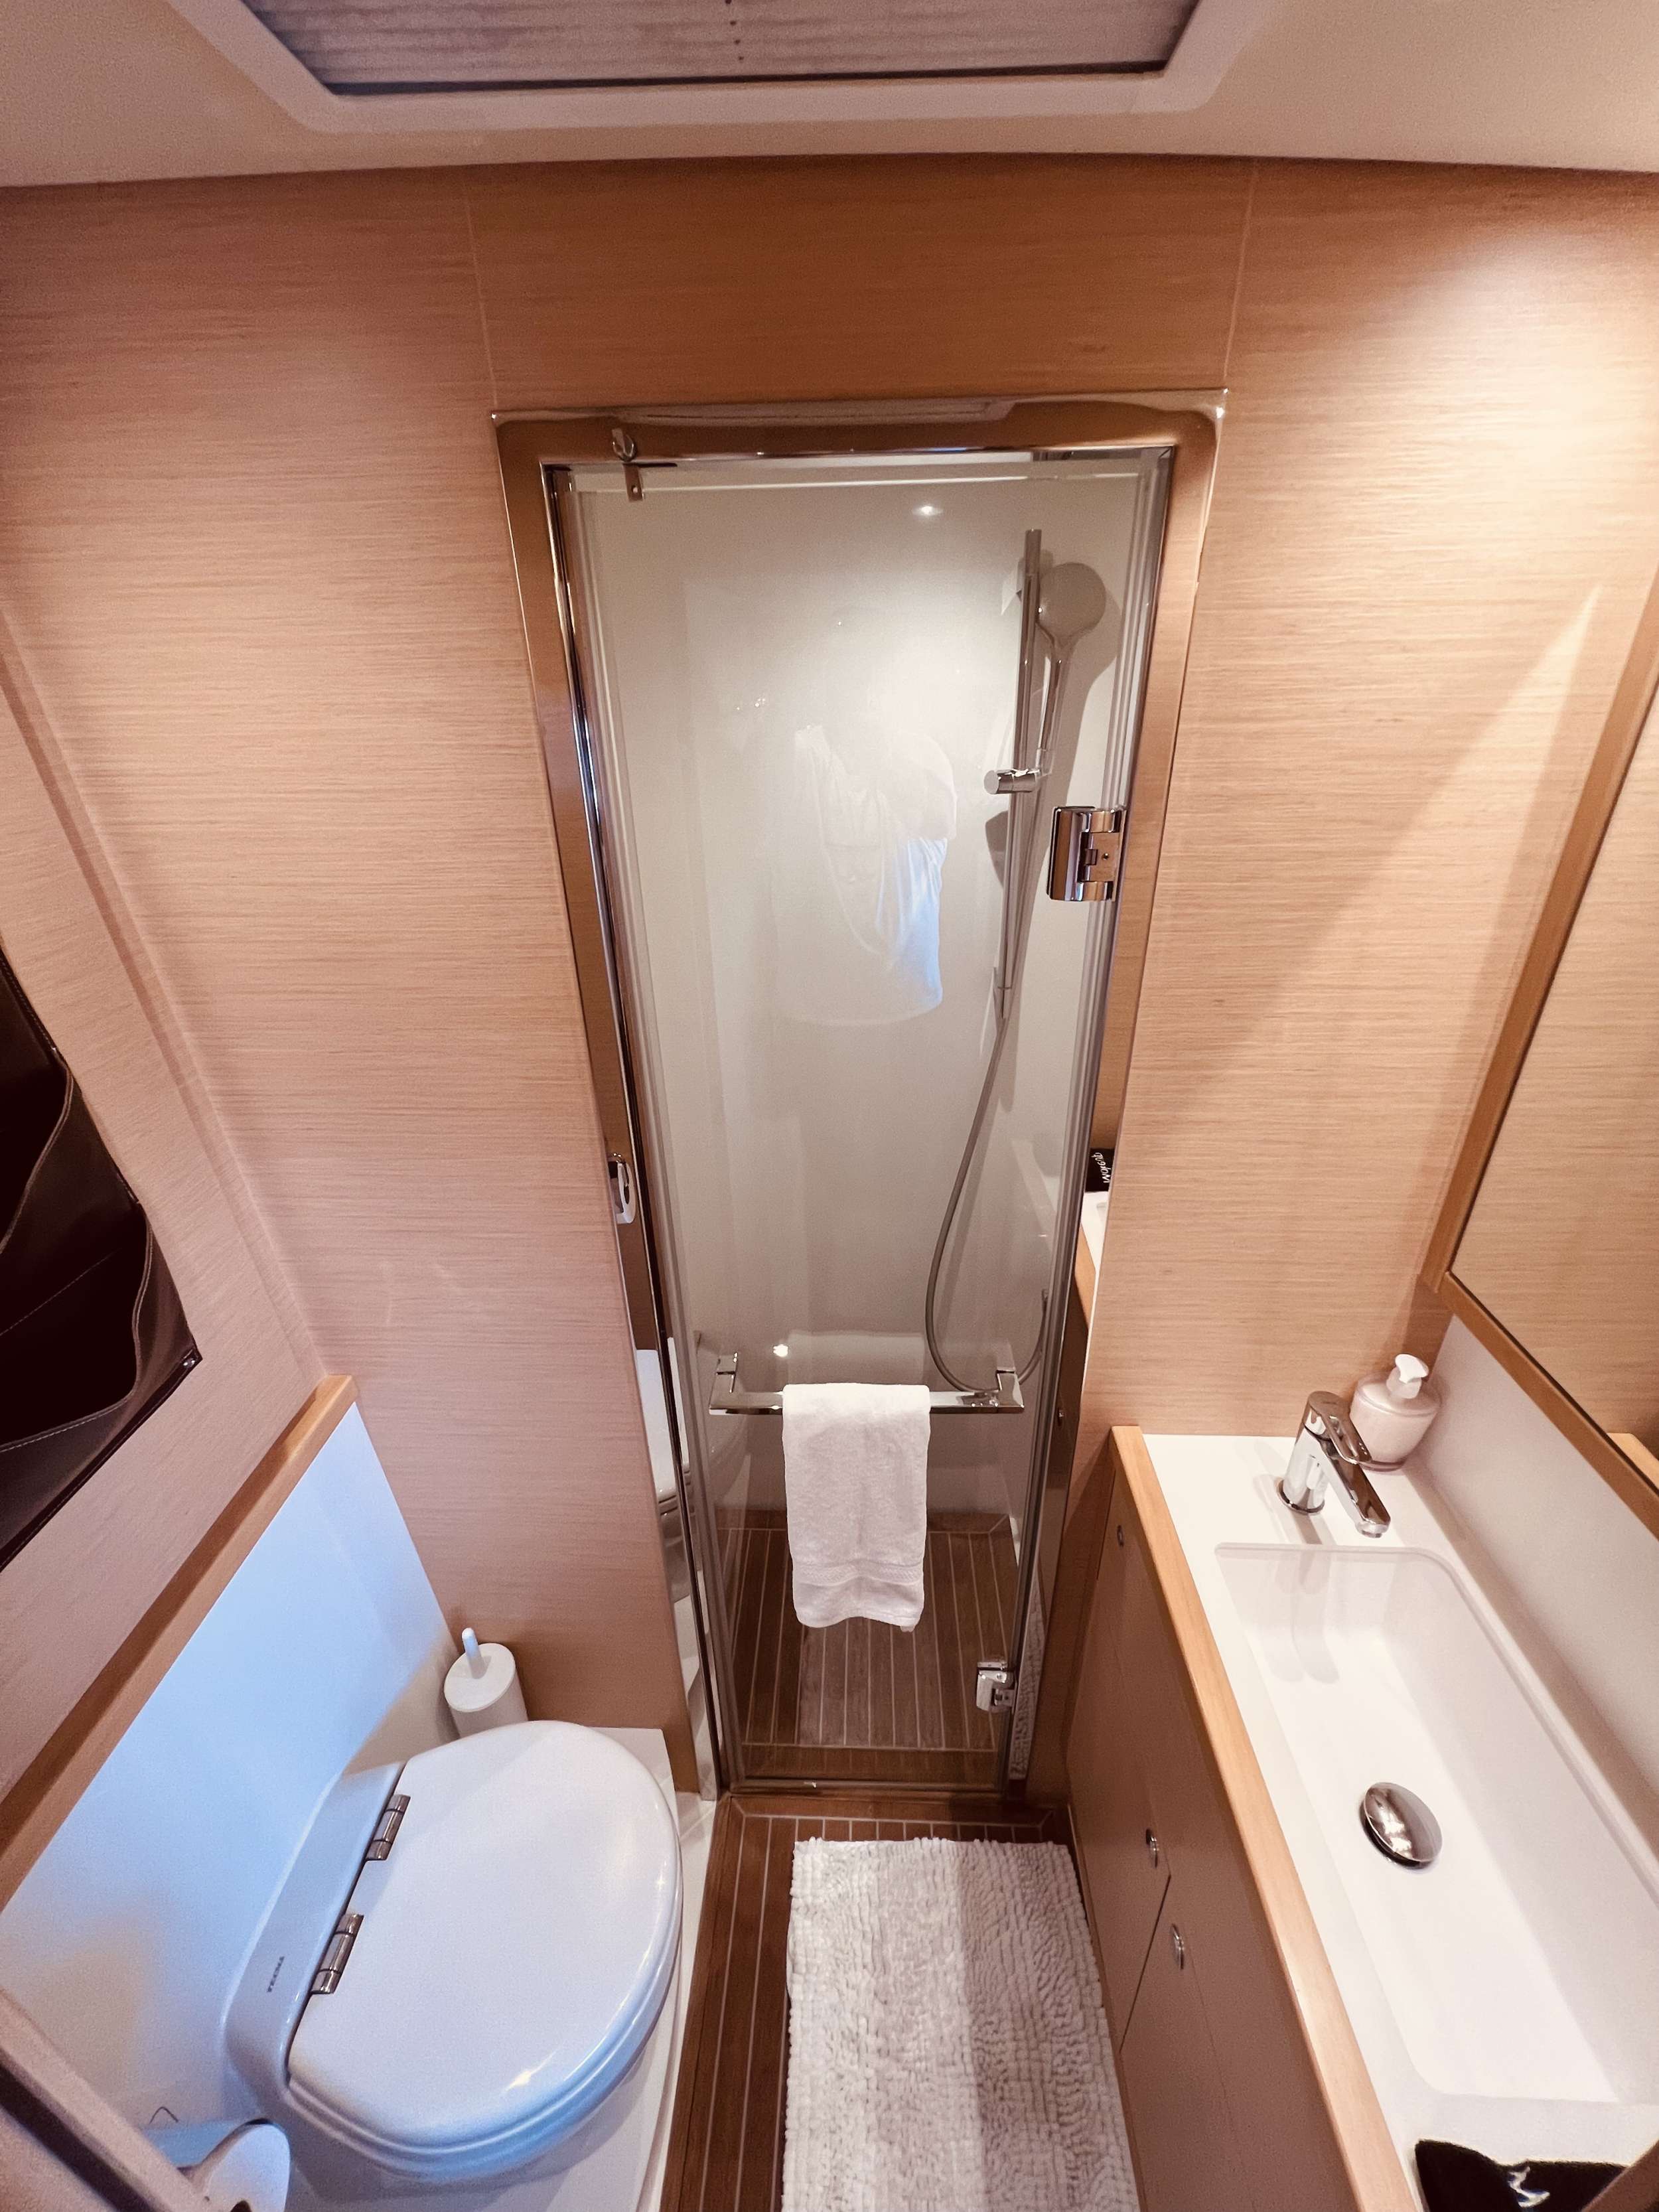 All cabins are ensuite with head and shower.